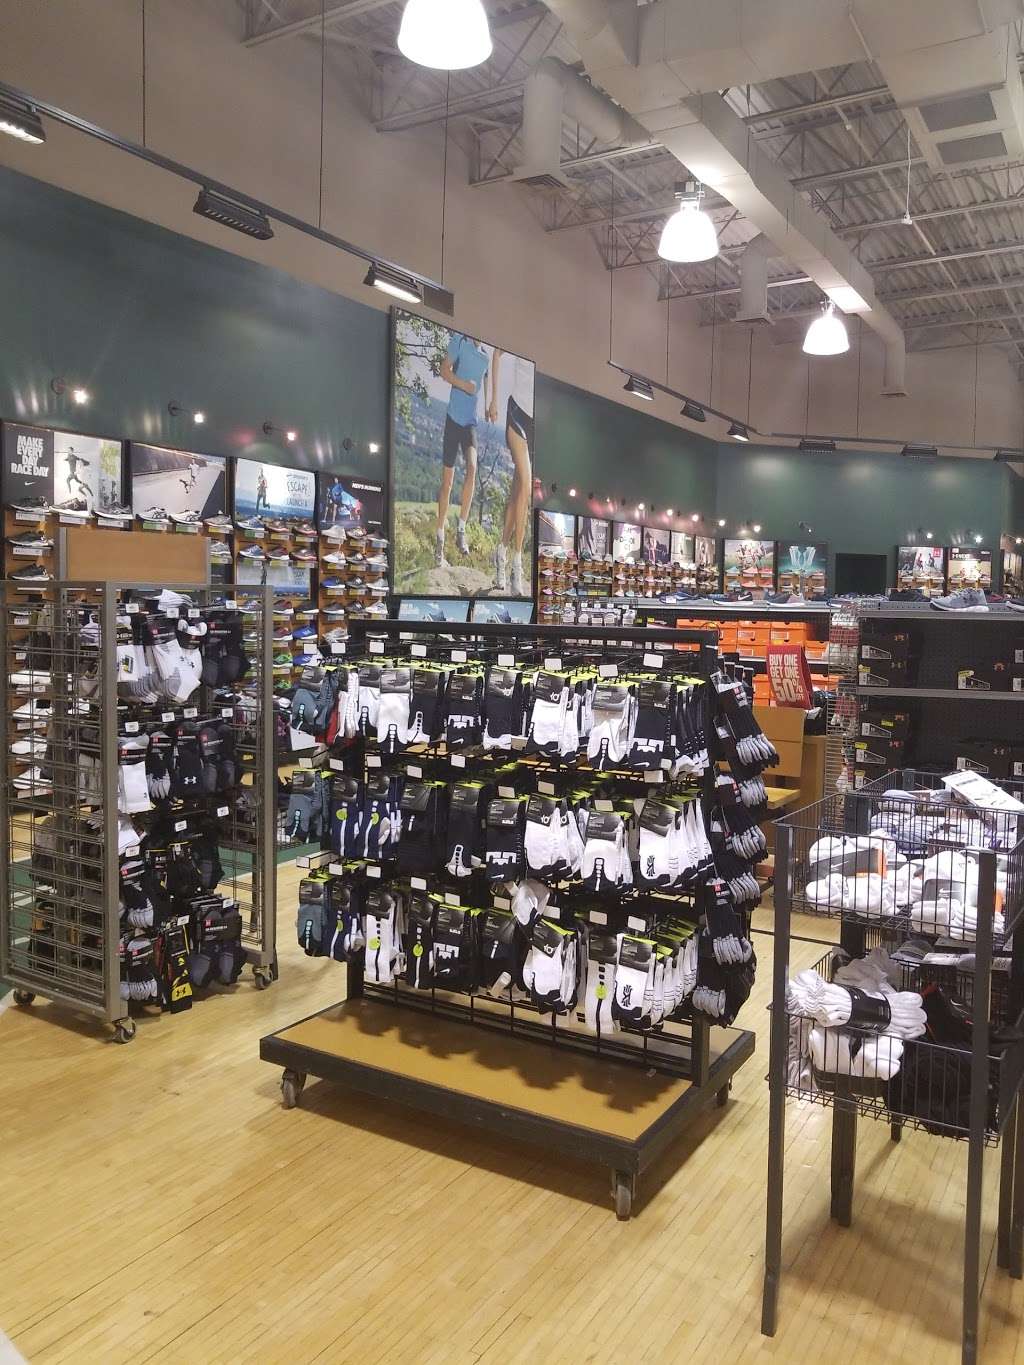 DICKS Sporting Goods | 17780 Garland Groh Blvd, Hagerstown, MD 21740 | Phone: (240) 420-0140